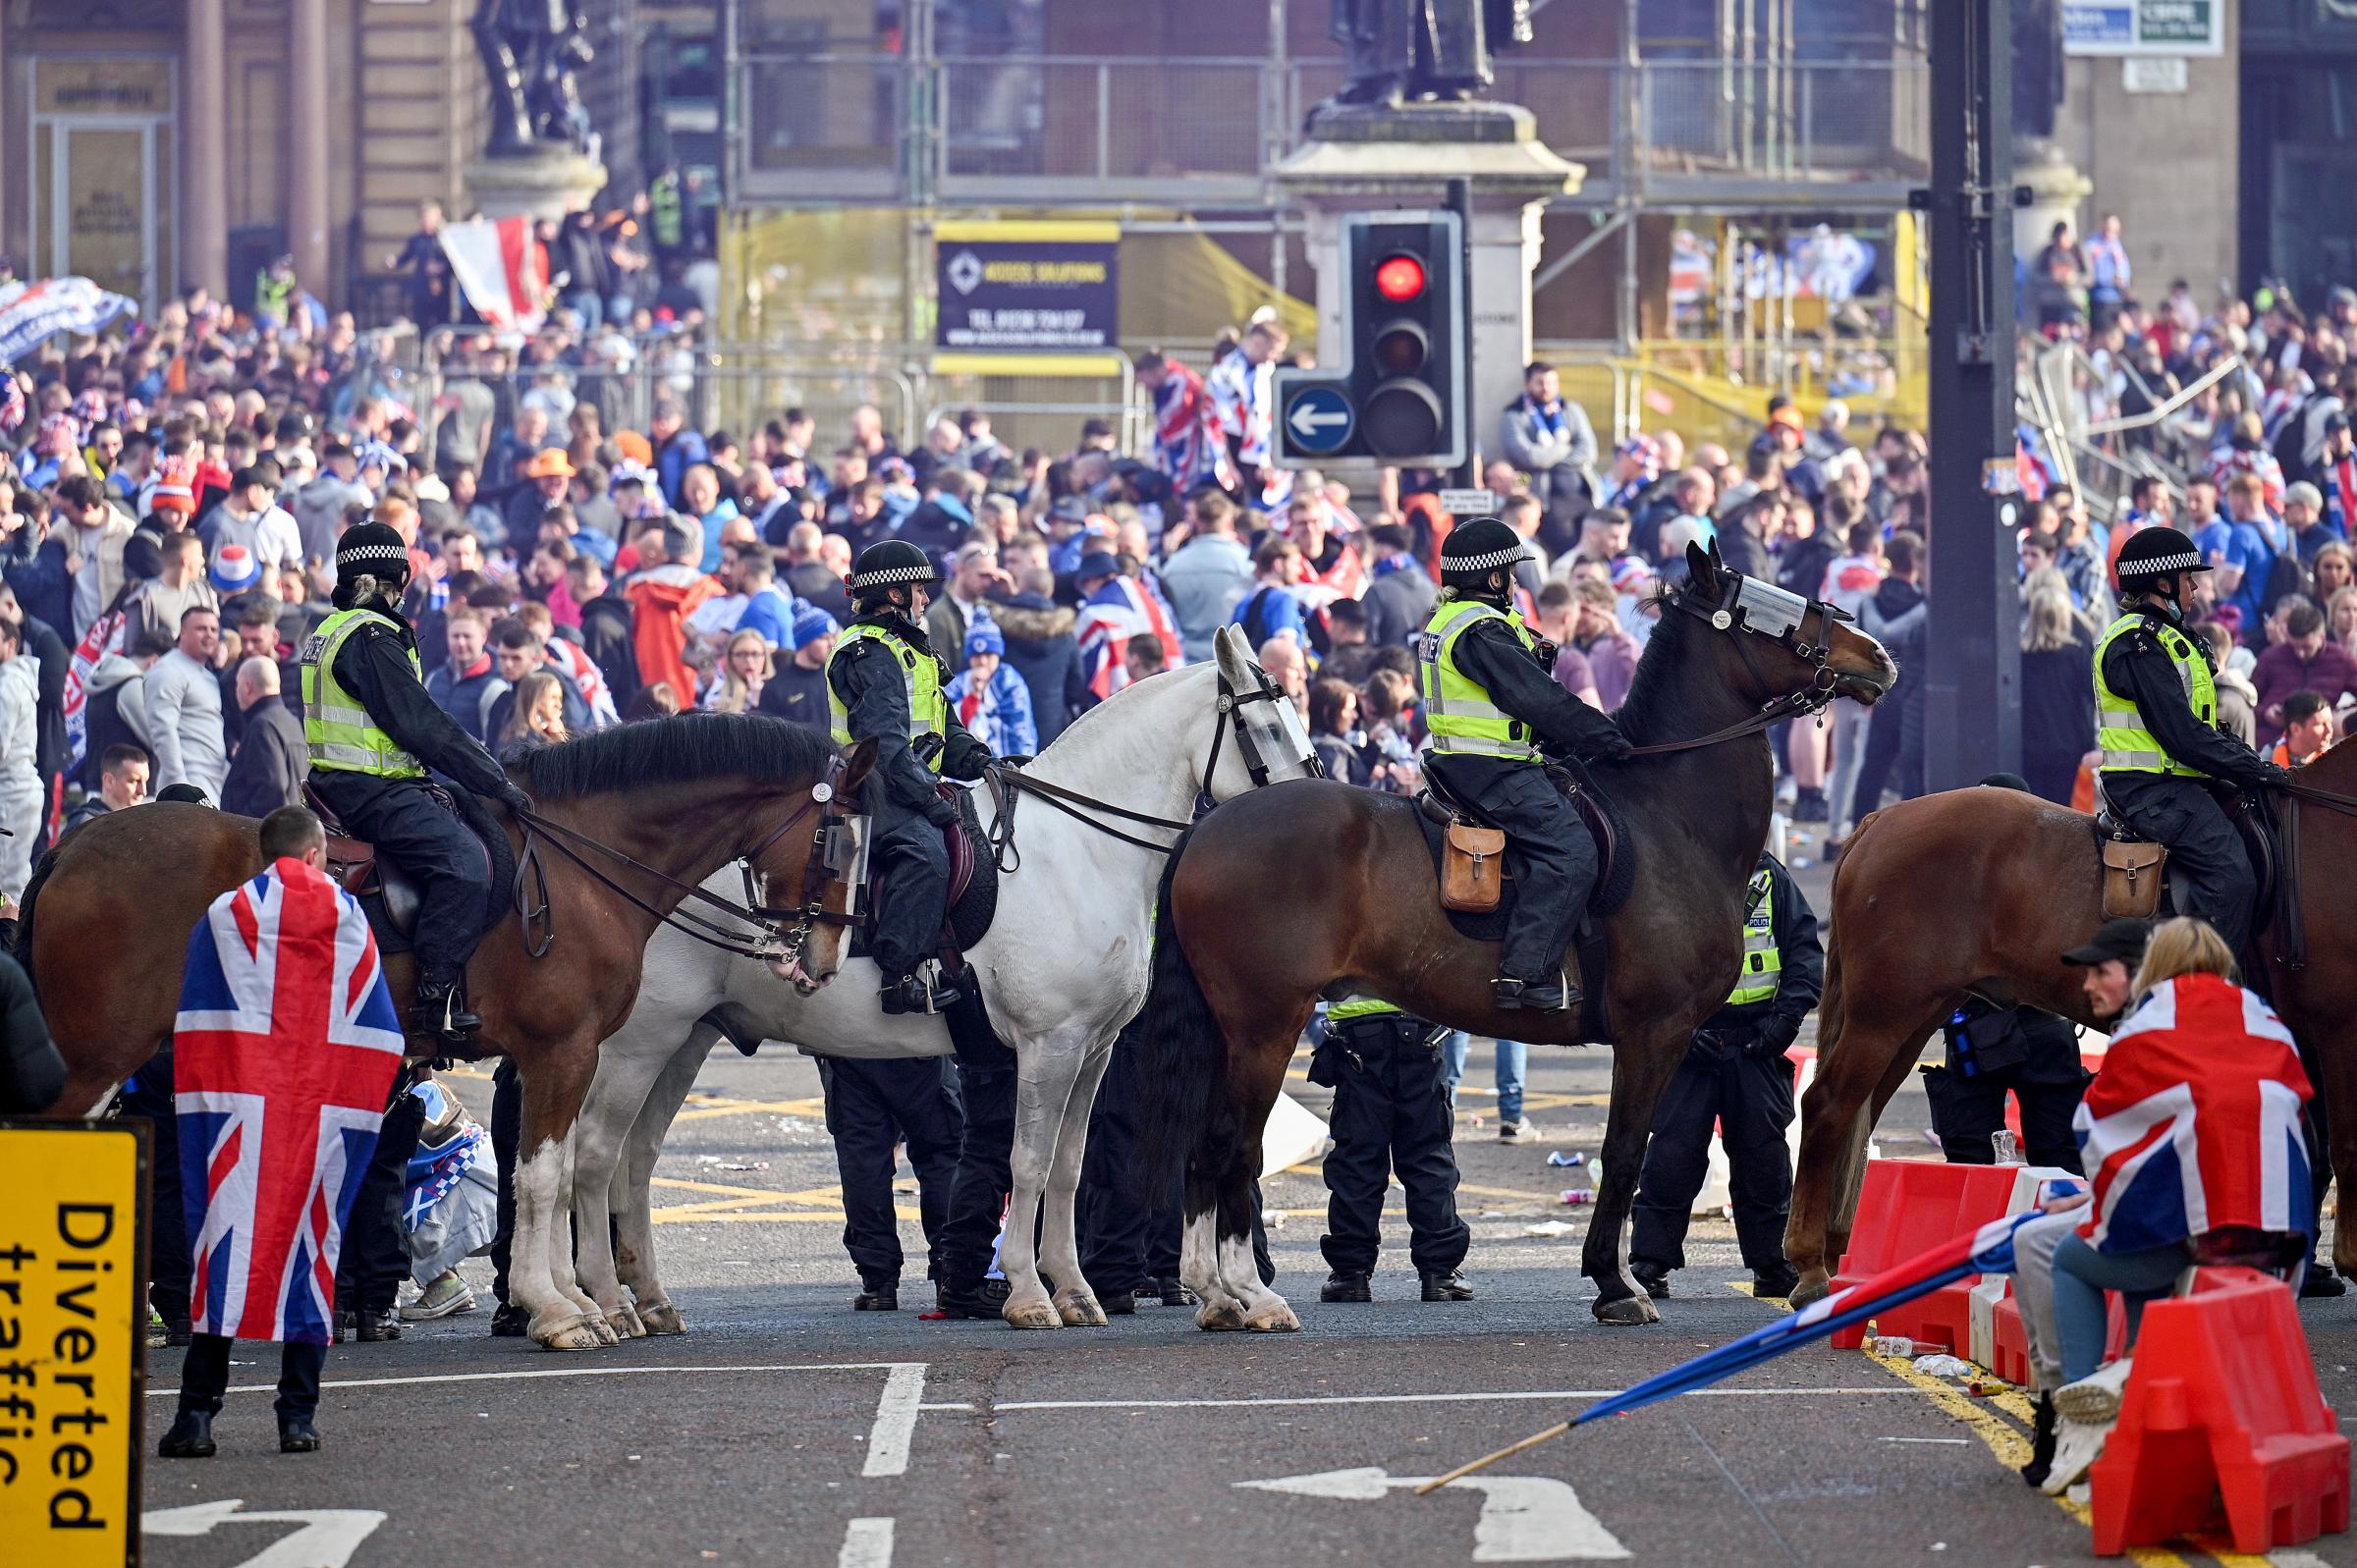 Mounted police look on as Rangers fans gather in Glasgow city centre on Saturday